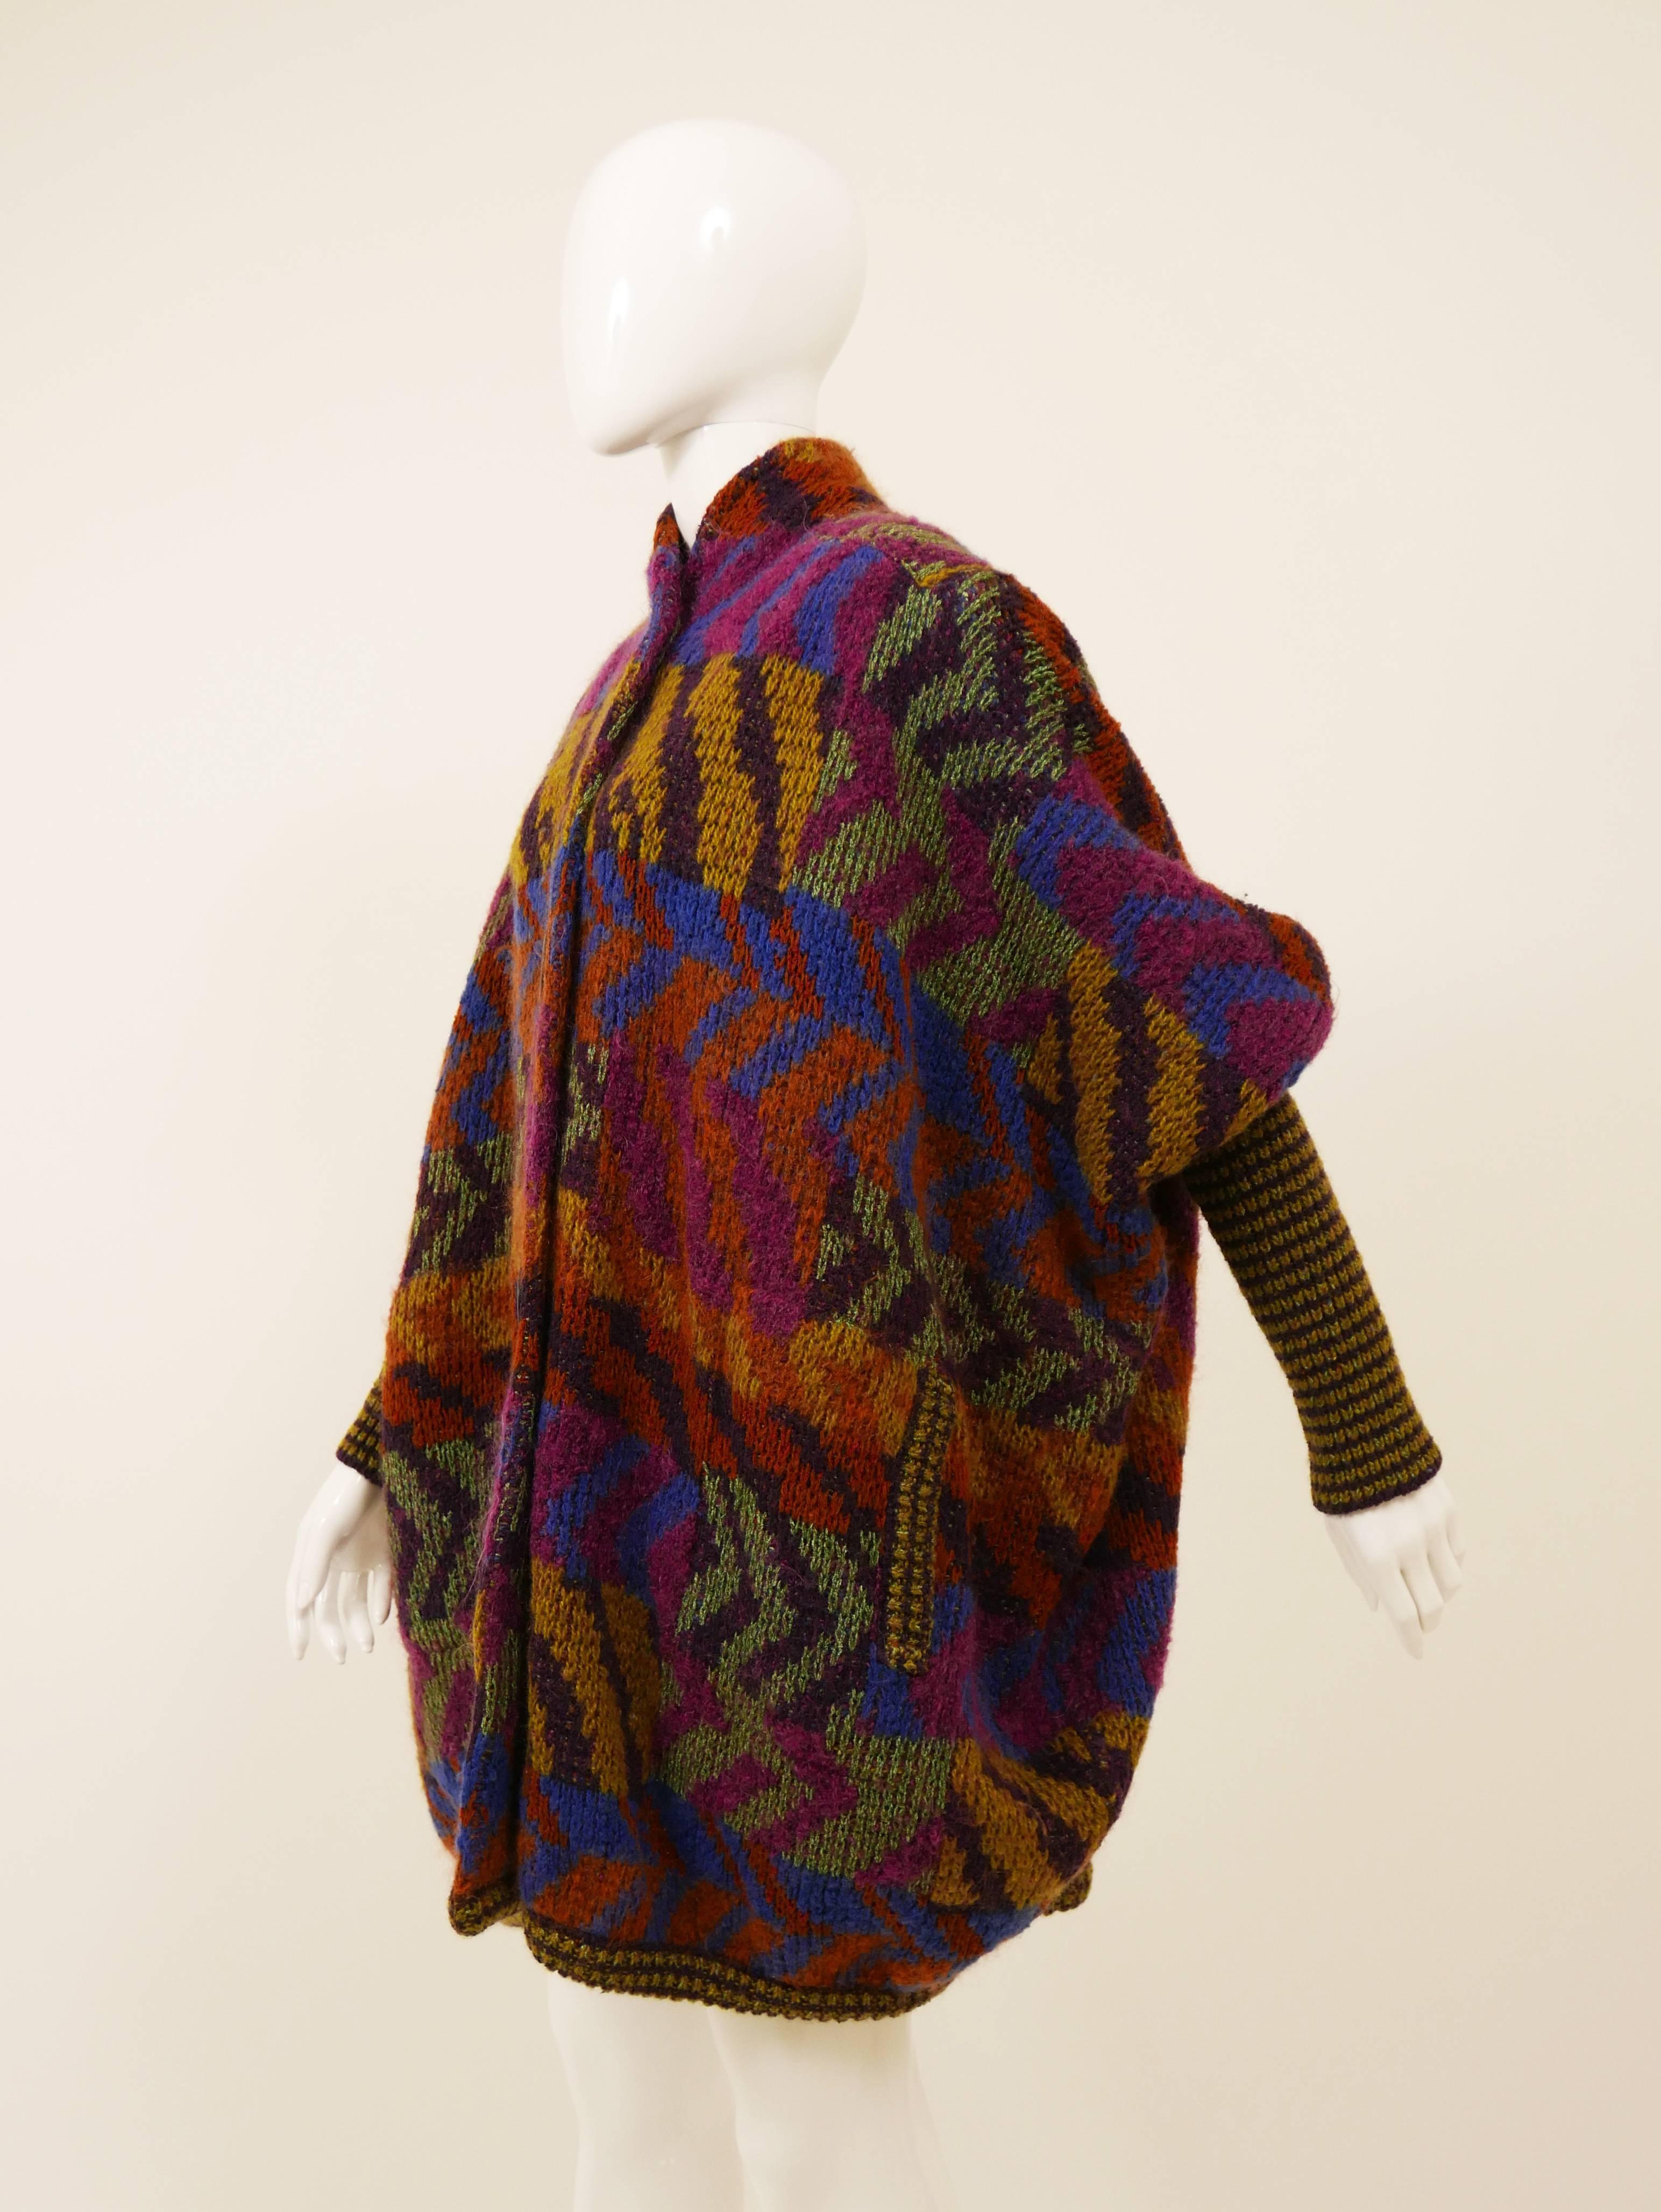 This beautiful 1980s Missoni cardigan jacket is in a wool knit with classic Missoni style abstract print. It's oversize style with two side pocket, big plastic buttons closure and amazing dolman sleeves.

Missoni is a high-end Italian fashion house